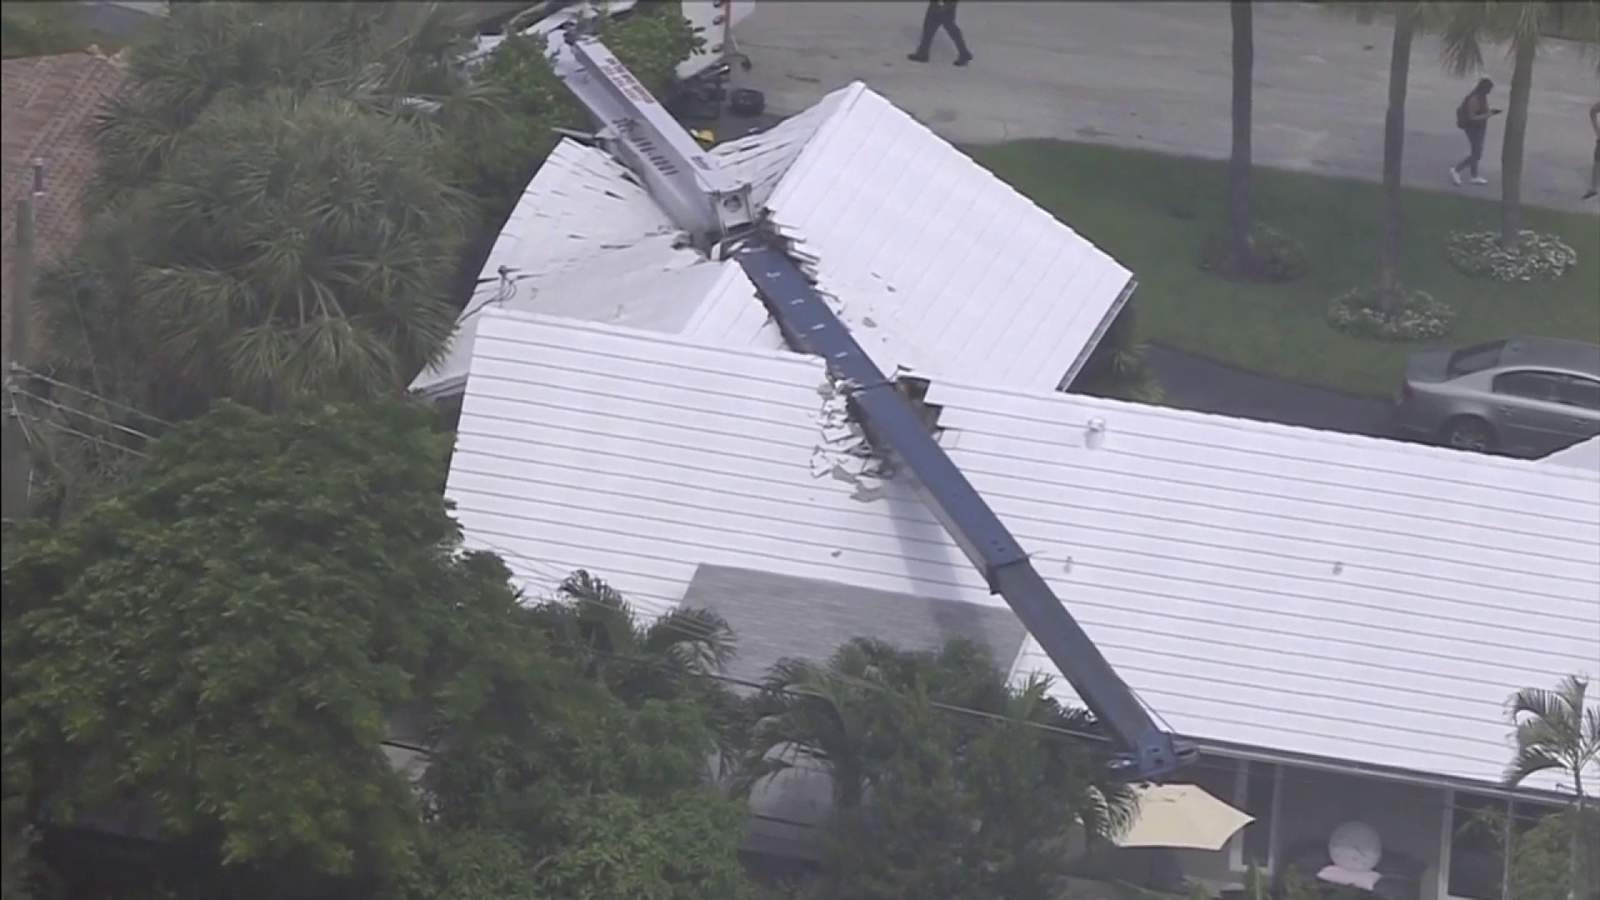 Cleanup efforts ongoing after crane falls on home in Fort Lauderdale